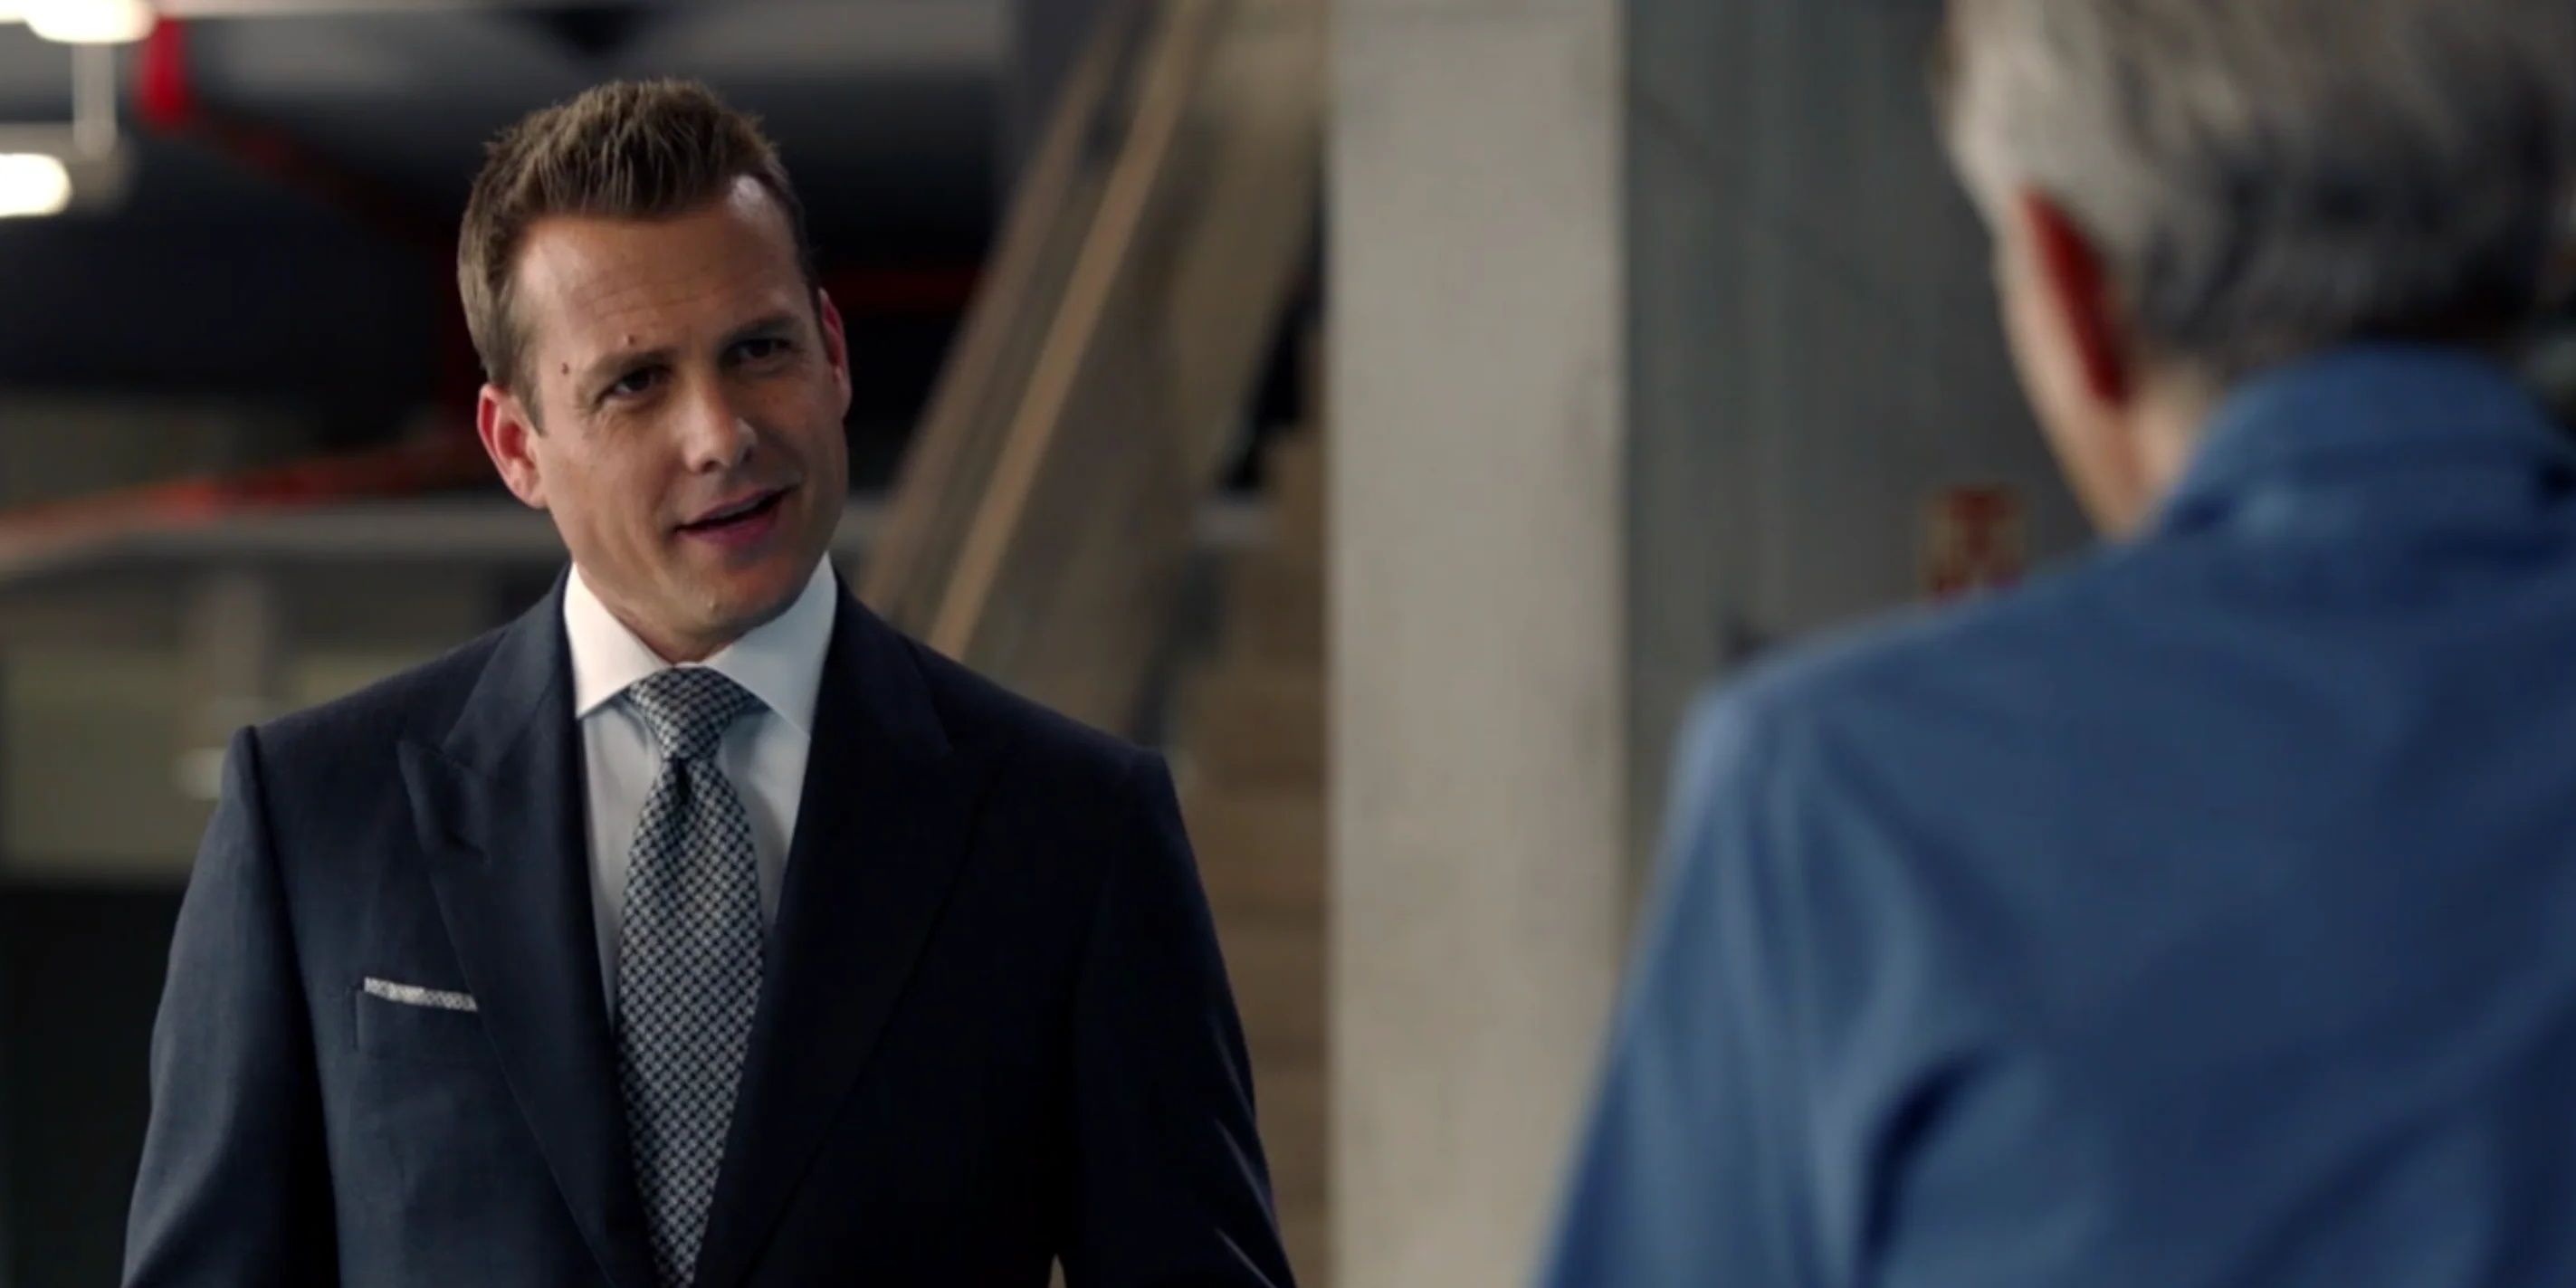 Harvey speaking angrily to someone in a scene from Suits.